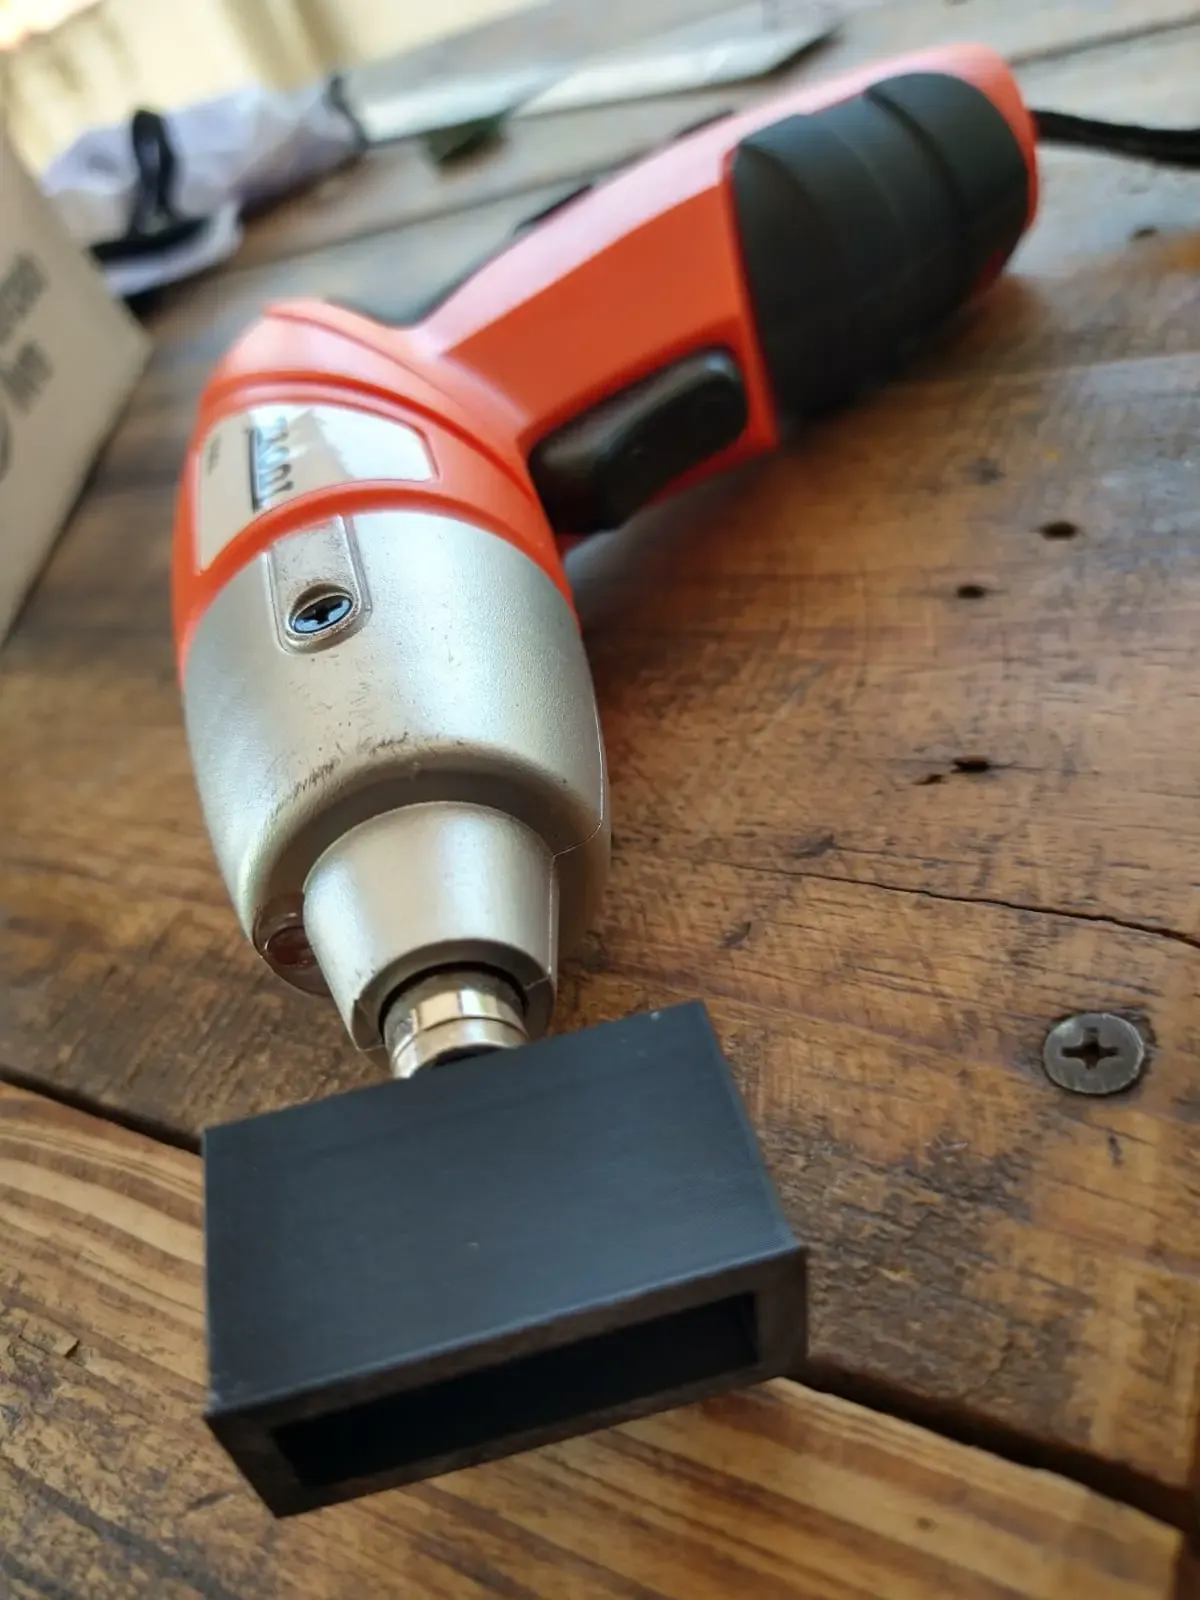 guitar adapter to use as a screwdriver